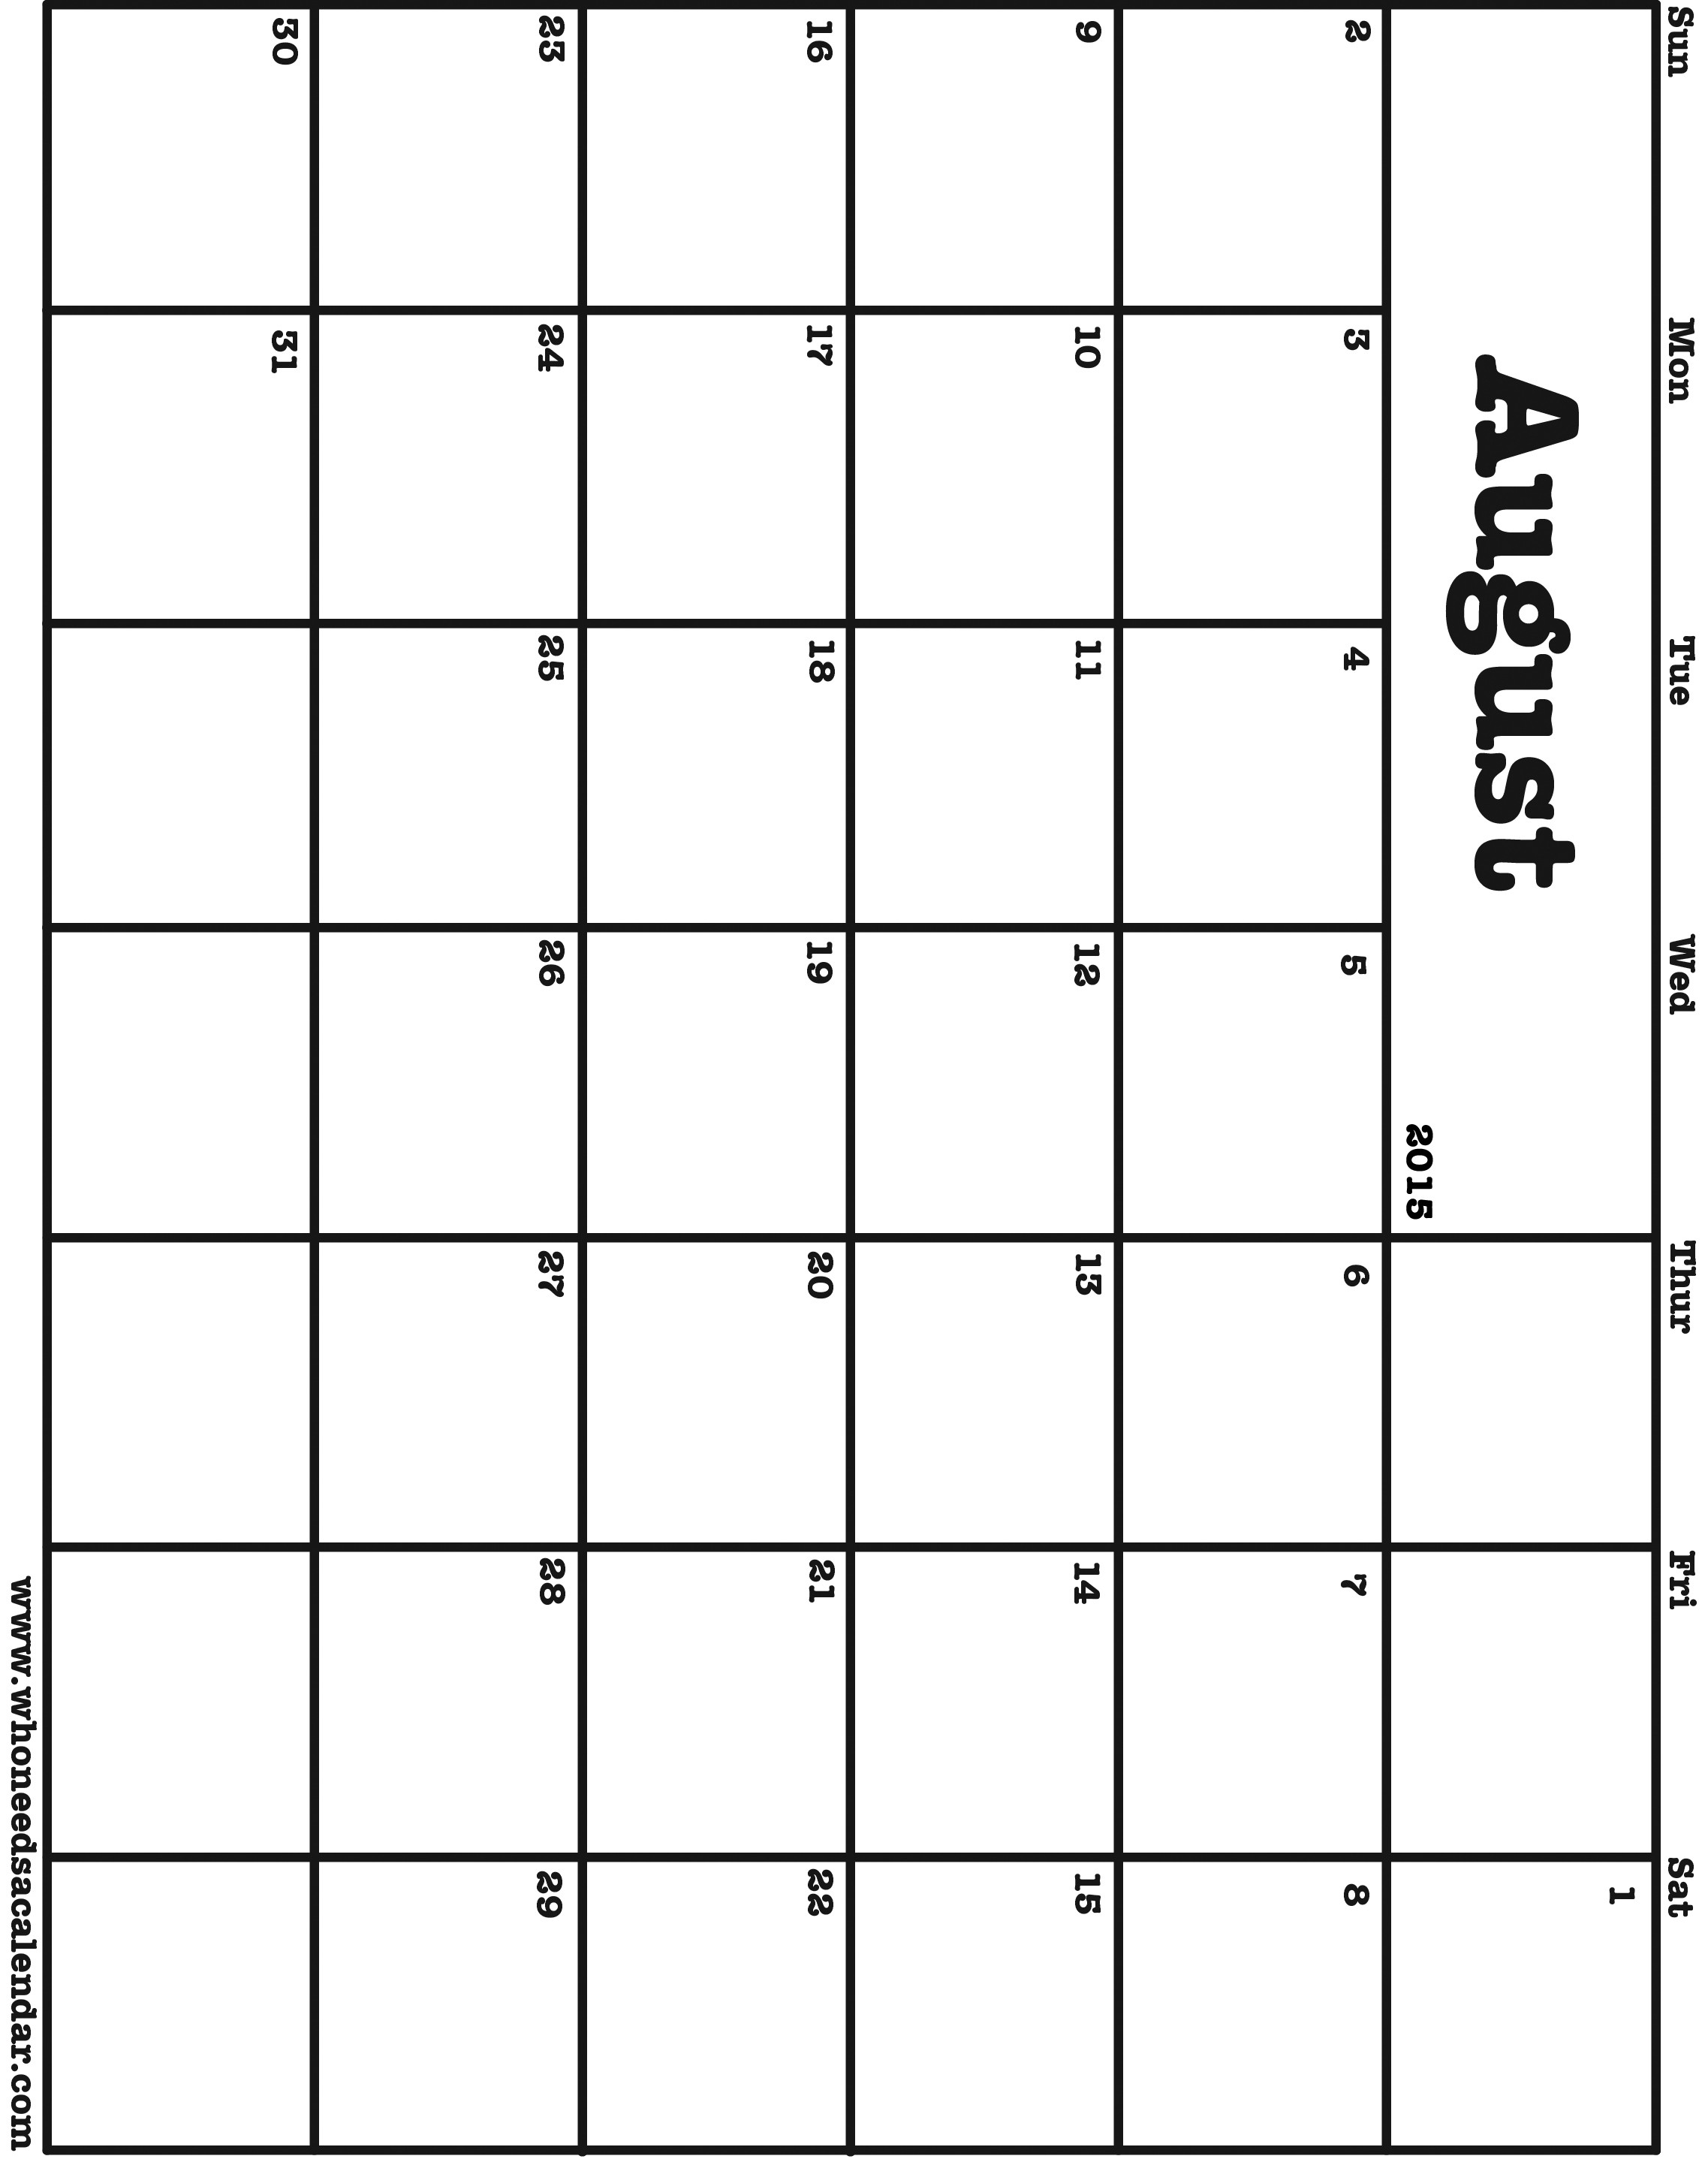 may-2020-calendar-free-download-aashe-free-calendar-for-may-2020-free